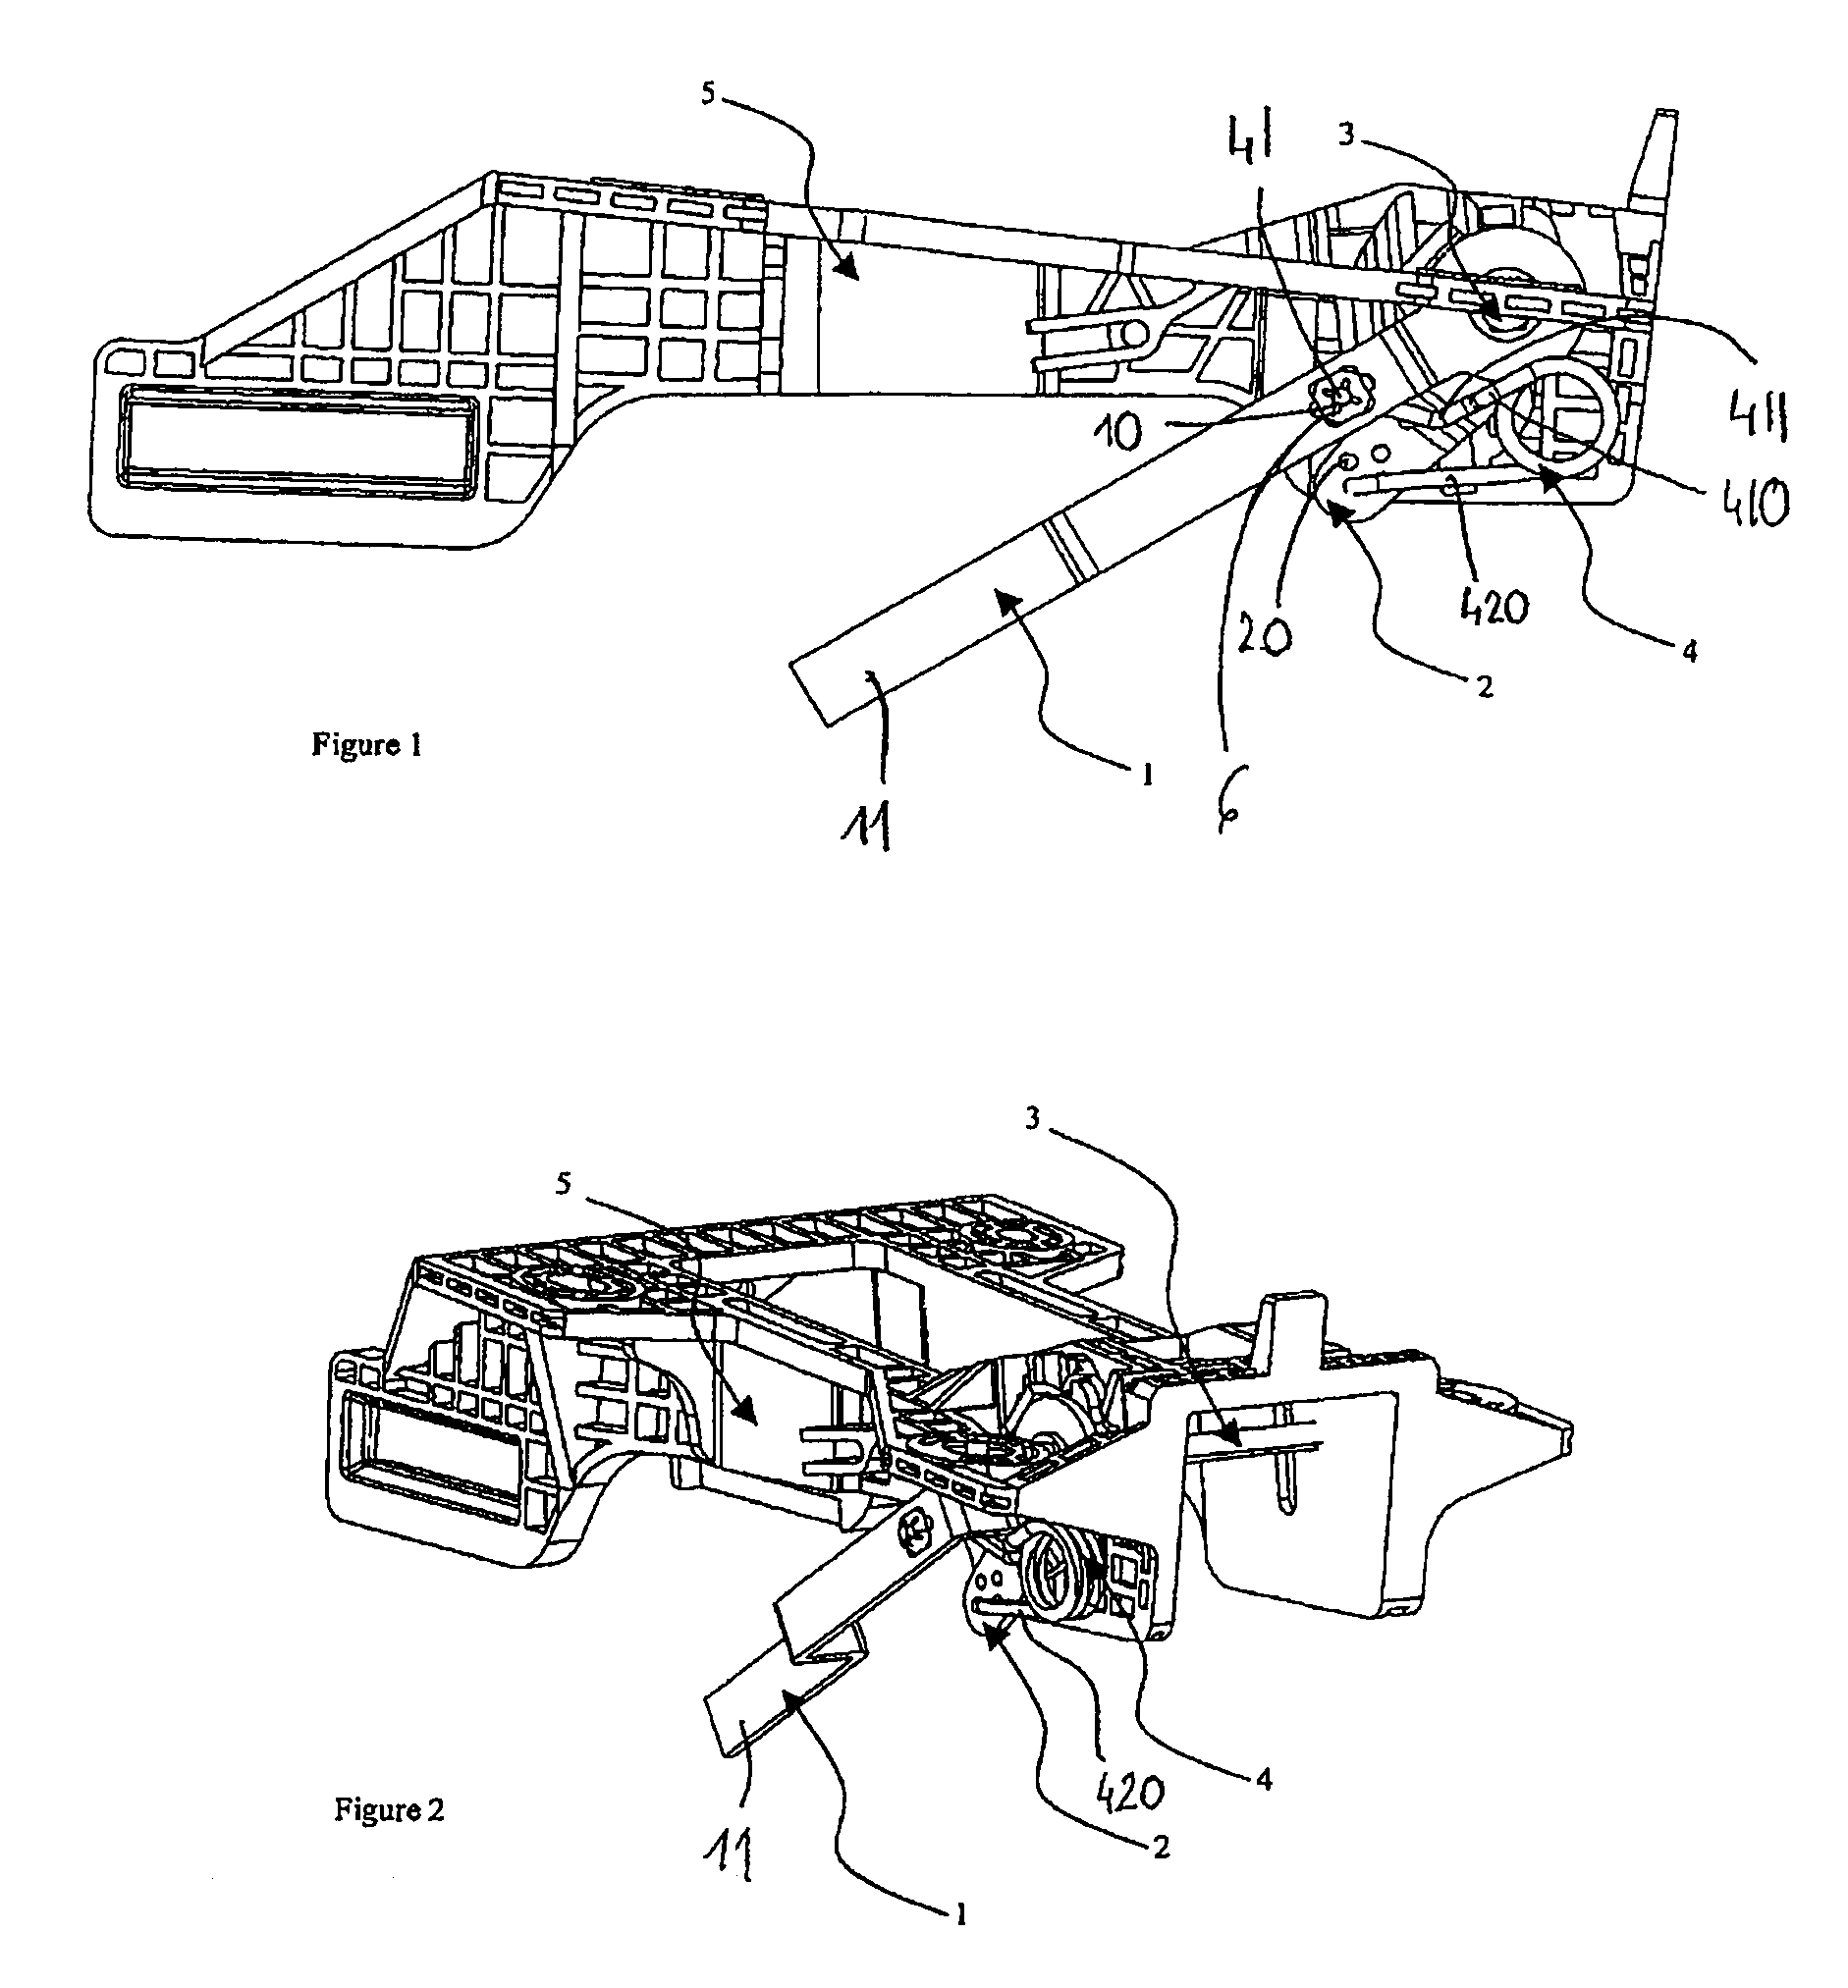 Device assisting with the locking of a steering column